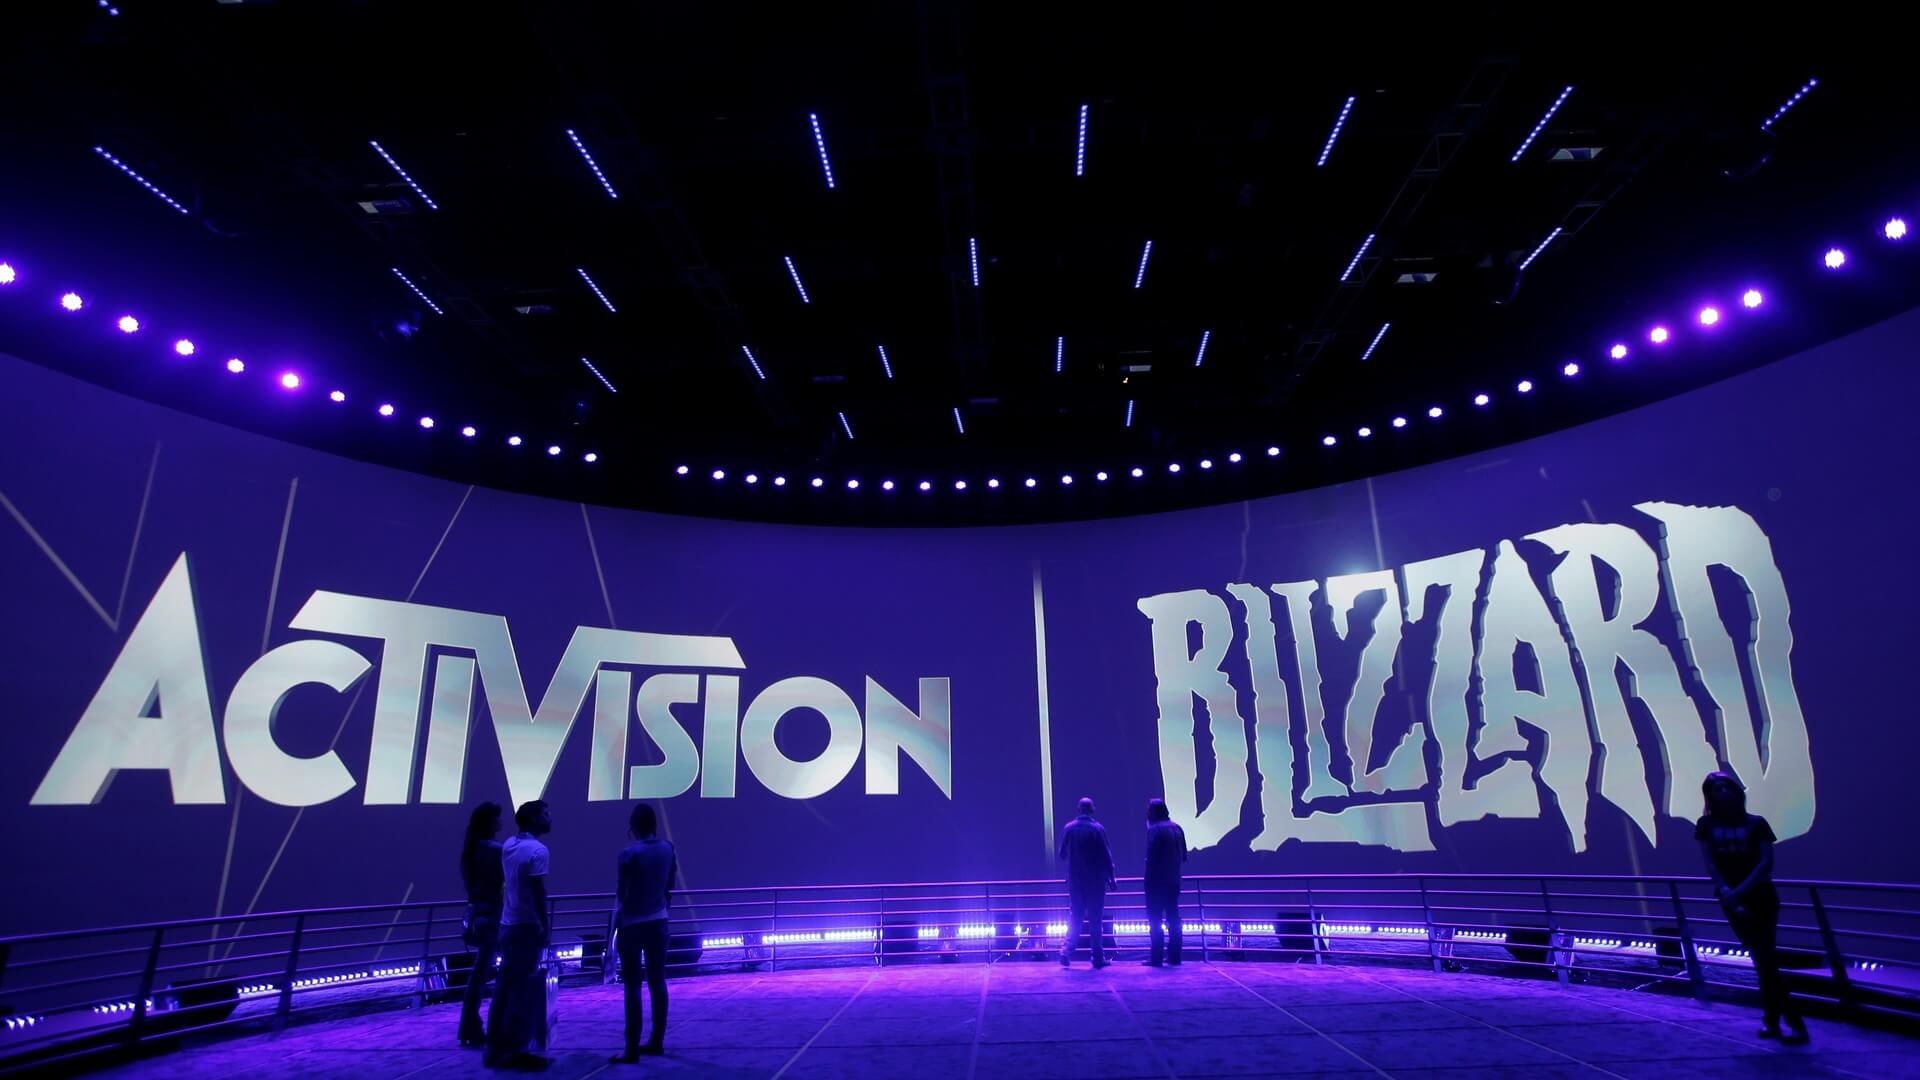 The United Kingdom has blocked the purchase of Activision Blizzard by Microsoft